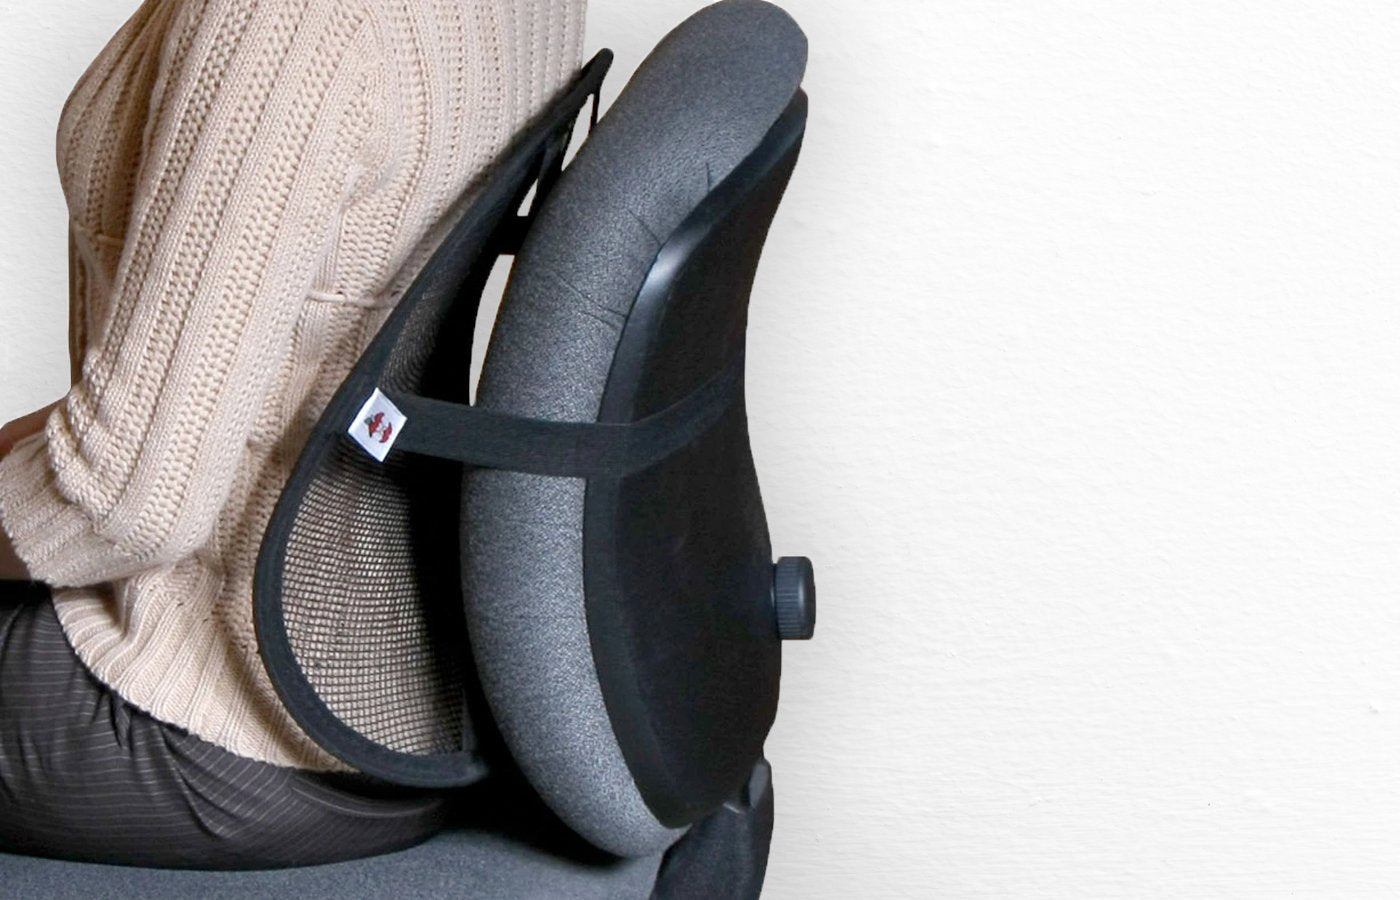 3 Reasons to Get a Support Cushion for Your Office Chair